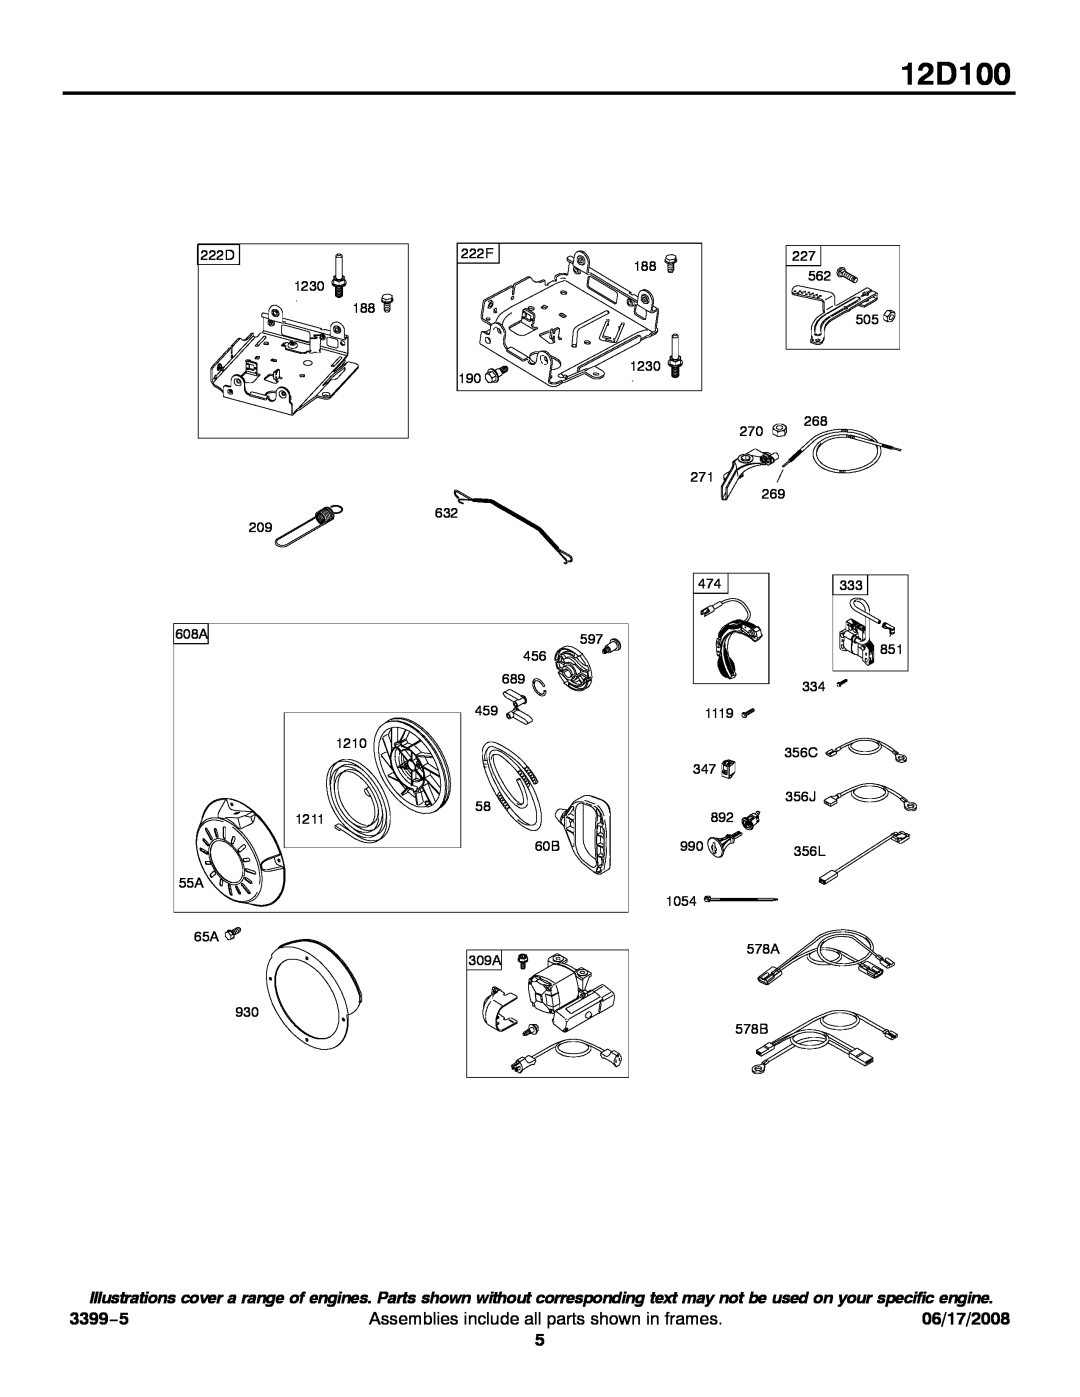 Snapper 12D100 service manual 3399−5, Assemblies include all parts shown in frames, 06/17/2008 